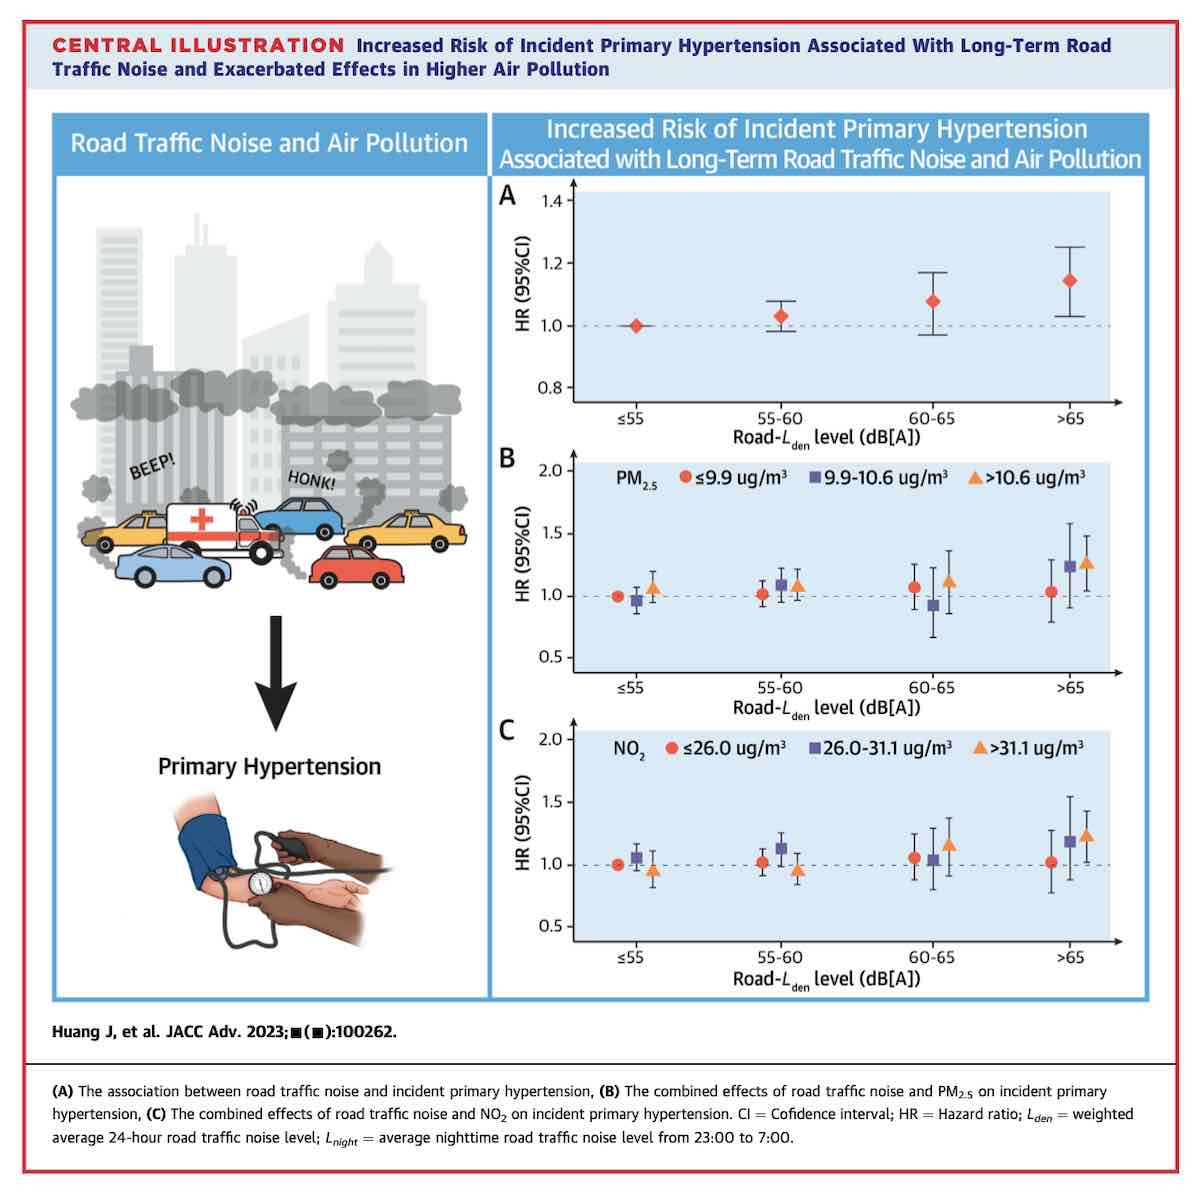 Increased Risk of Incident Primary Hypertension Associated With Long-Term Road Traffic Noise and Exacerbated Effects in Higher Air Pollution